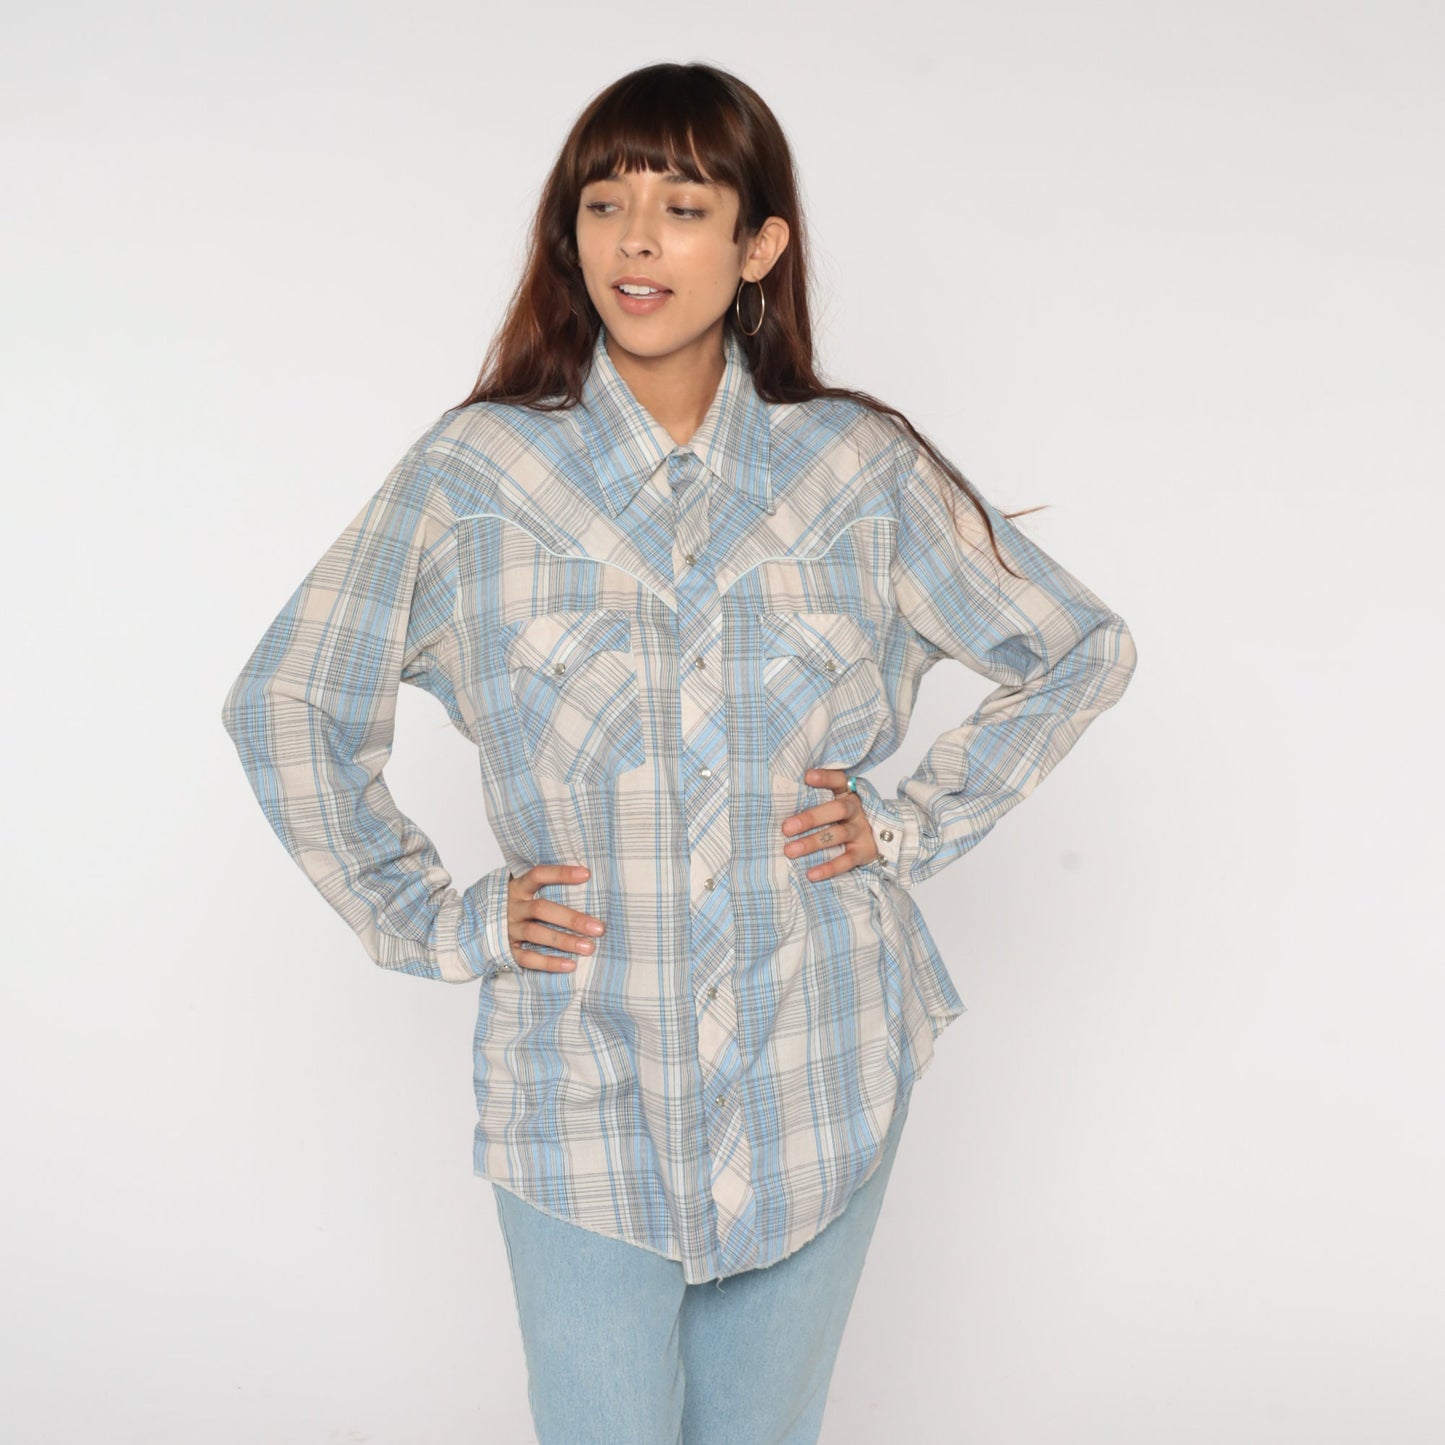 Plaid Western Shirt 80s Button Up Pearl Snap Shirt Collared Rodeo Cowgirl Long Sleeve Cowboy Blue Vintage 1980s Karman JC Penney Men's Large